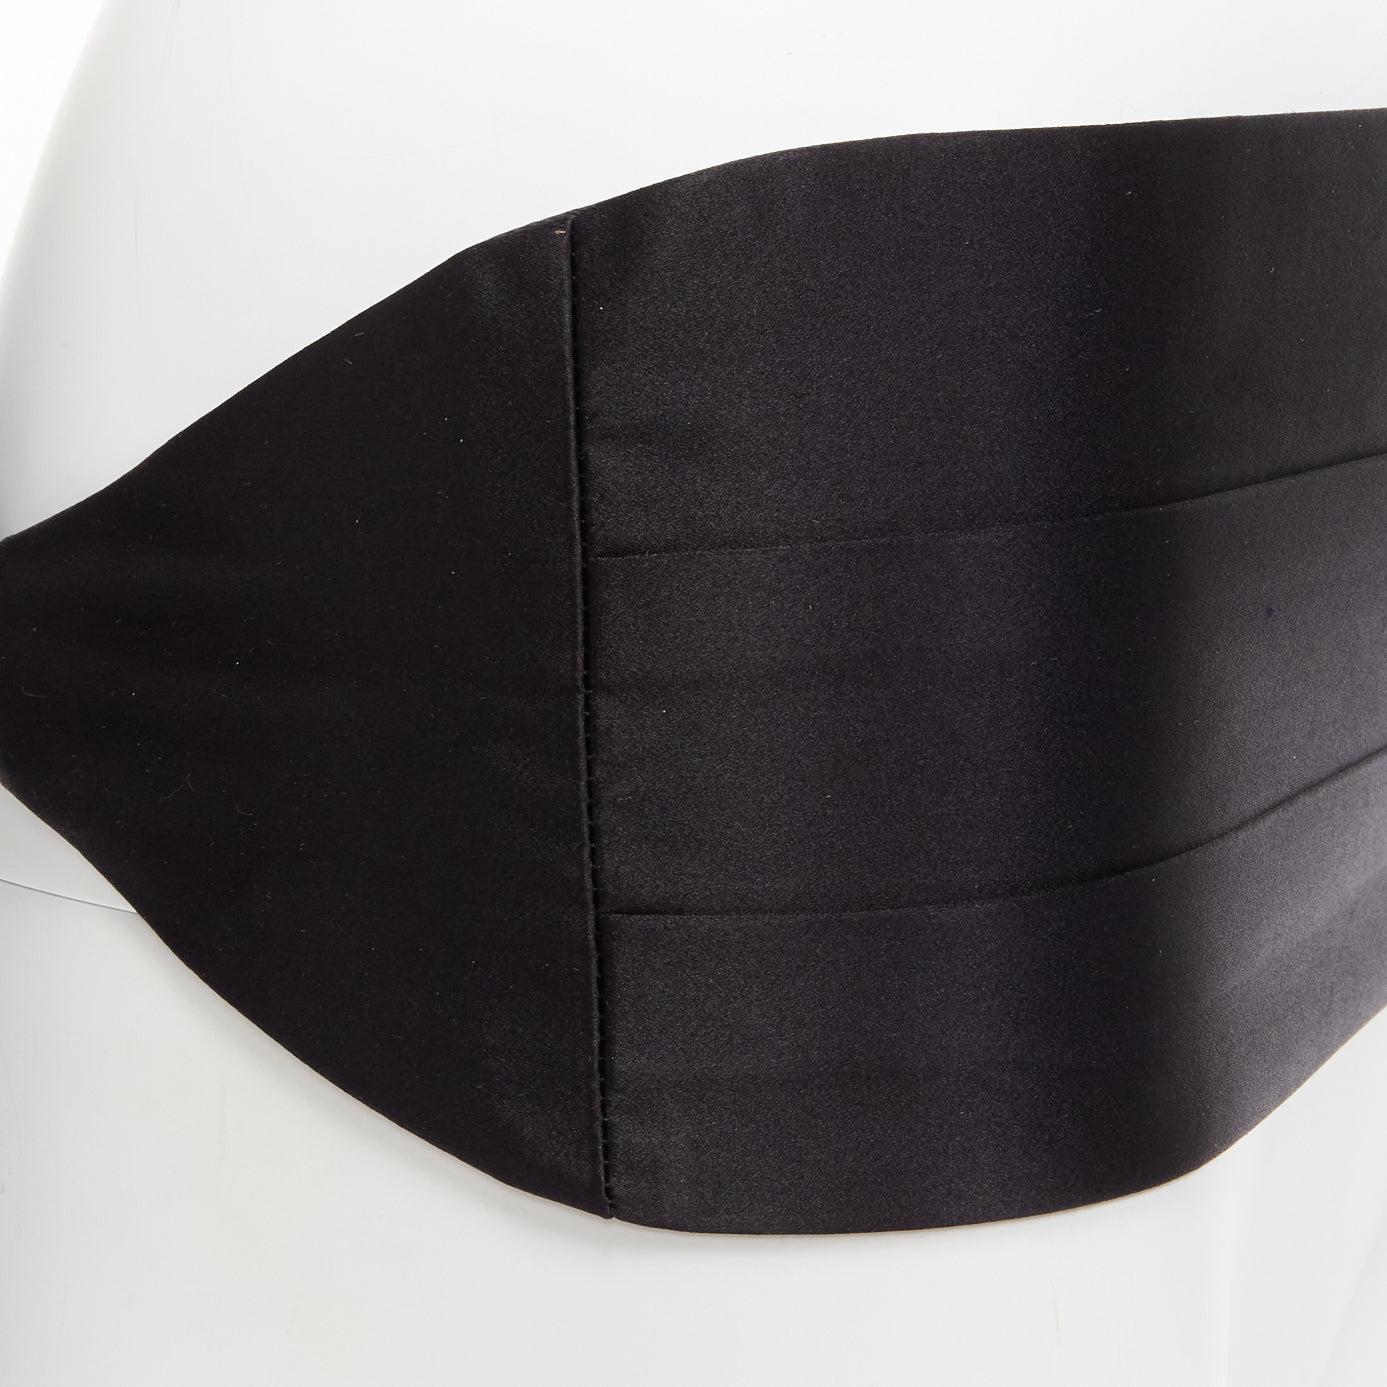 new MAISON MARGIELA 2011 black 100% silk cumberband elastic belt
Reference: BSHW/A00131
Brand: Maison Margiela
Collection: 2011
Material: Silk
Color: Black
Pattern: Solid
Closure: Buckle
Lining: Black Silk
Extra Details: Elasticated strap with